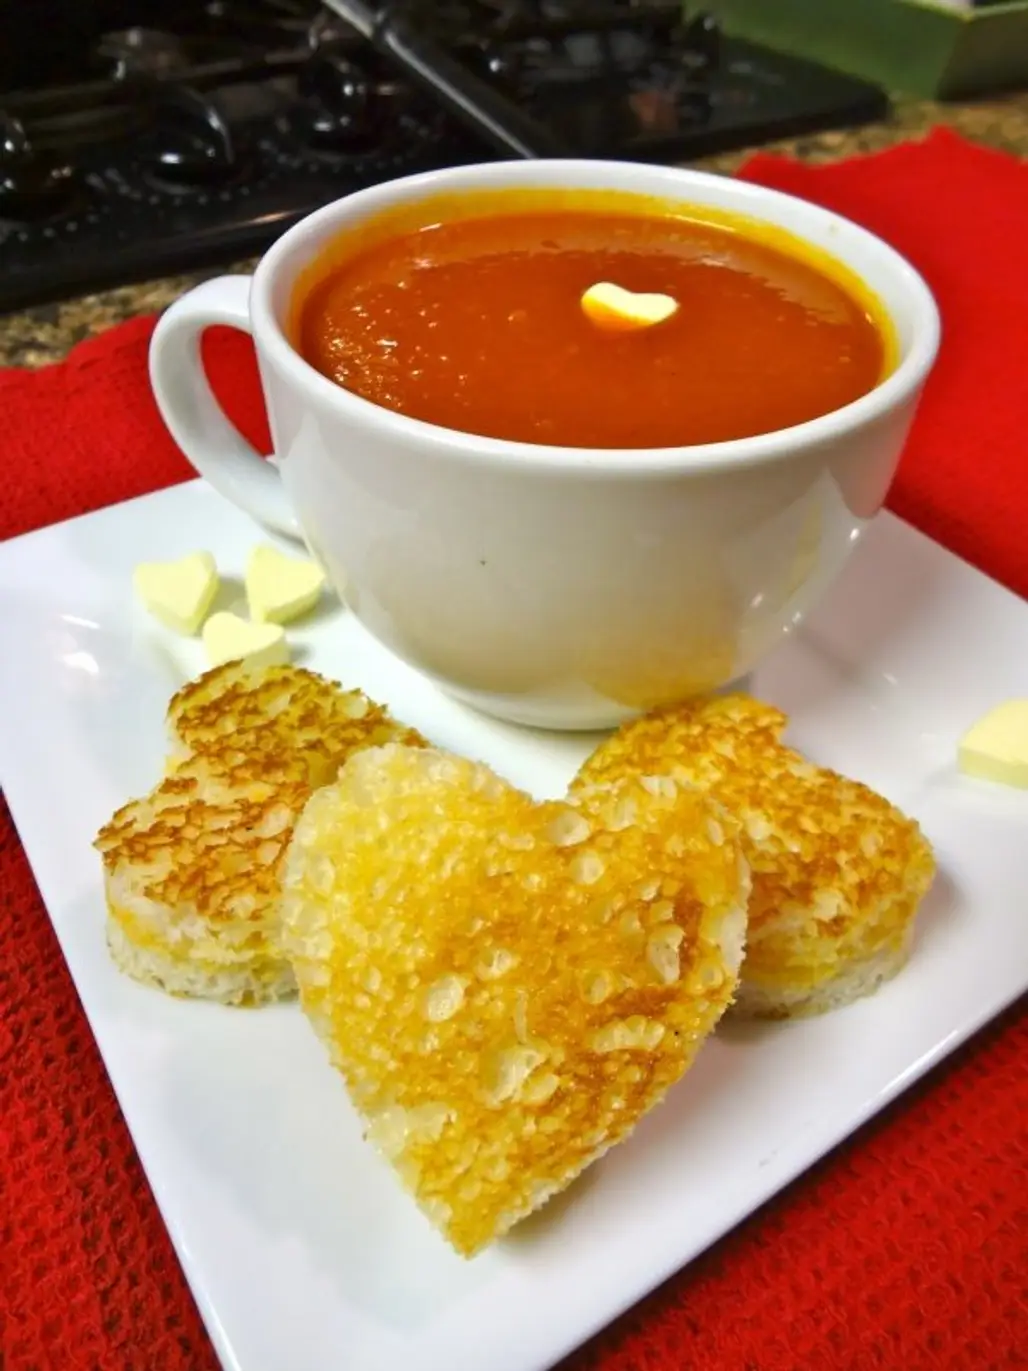 Serve Heart Shaped Sandwiches and Tomato Soup